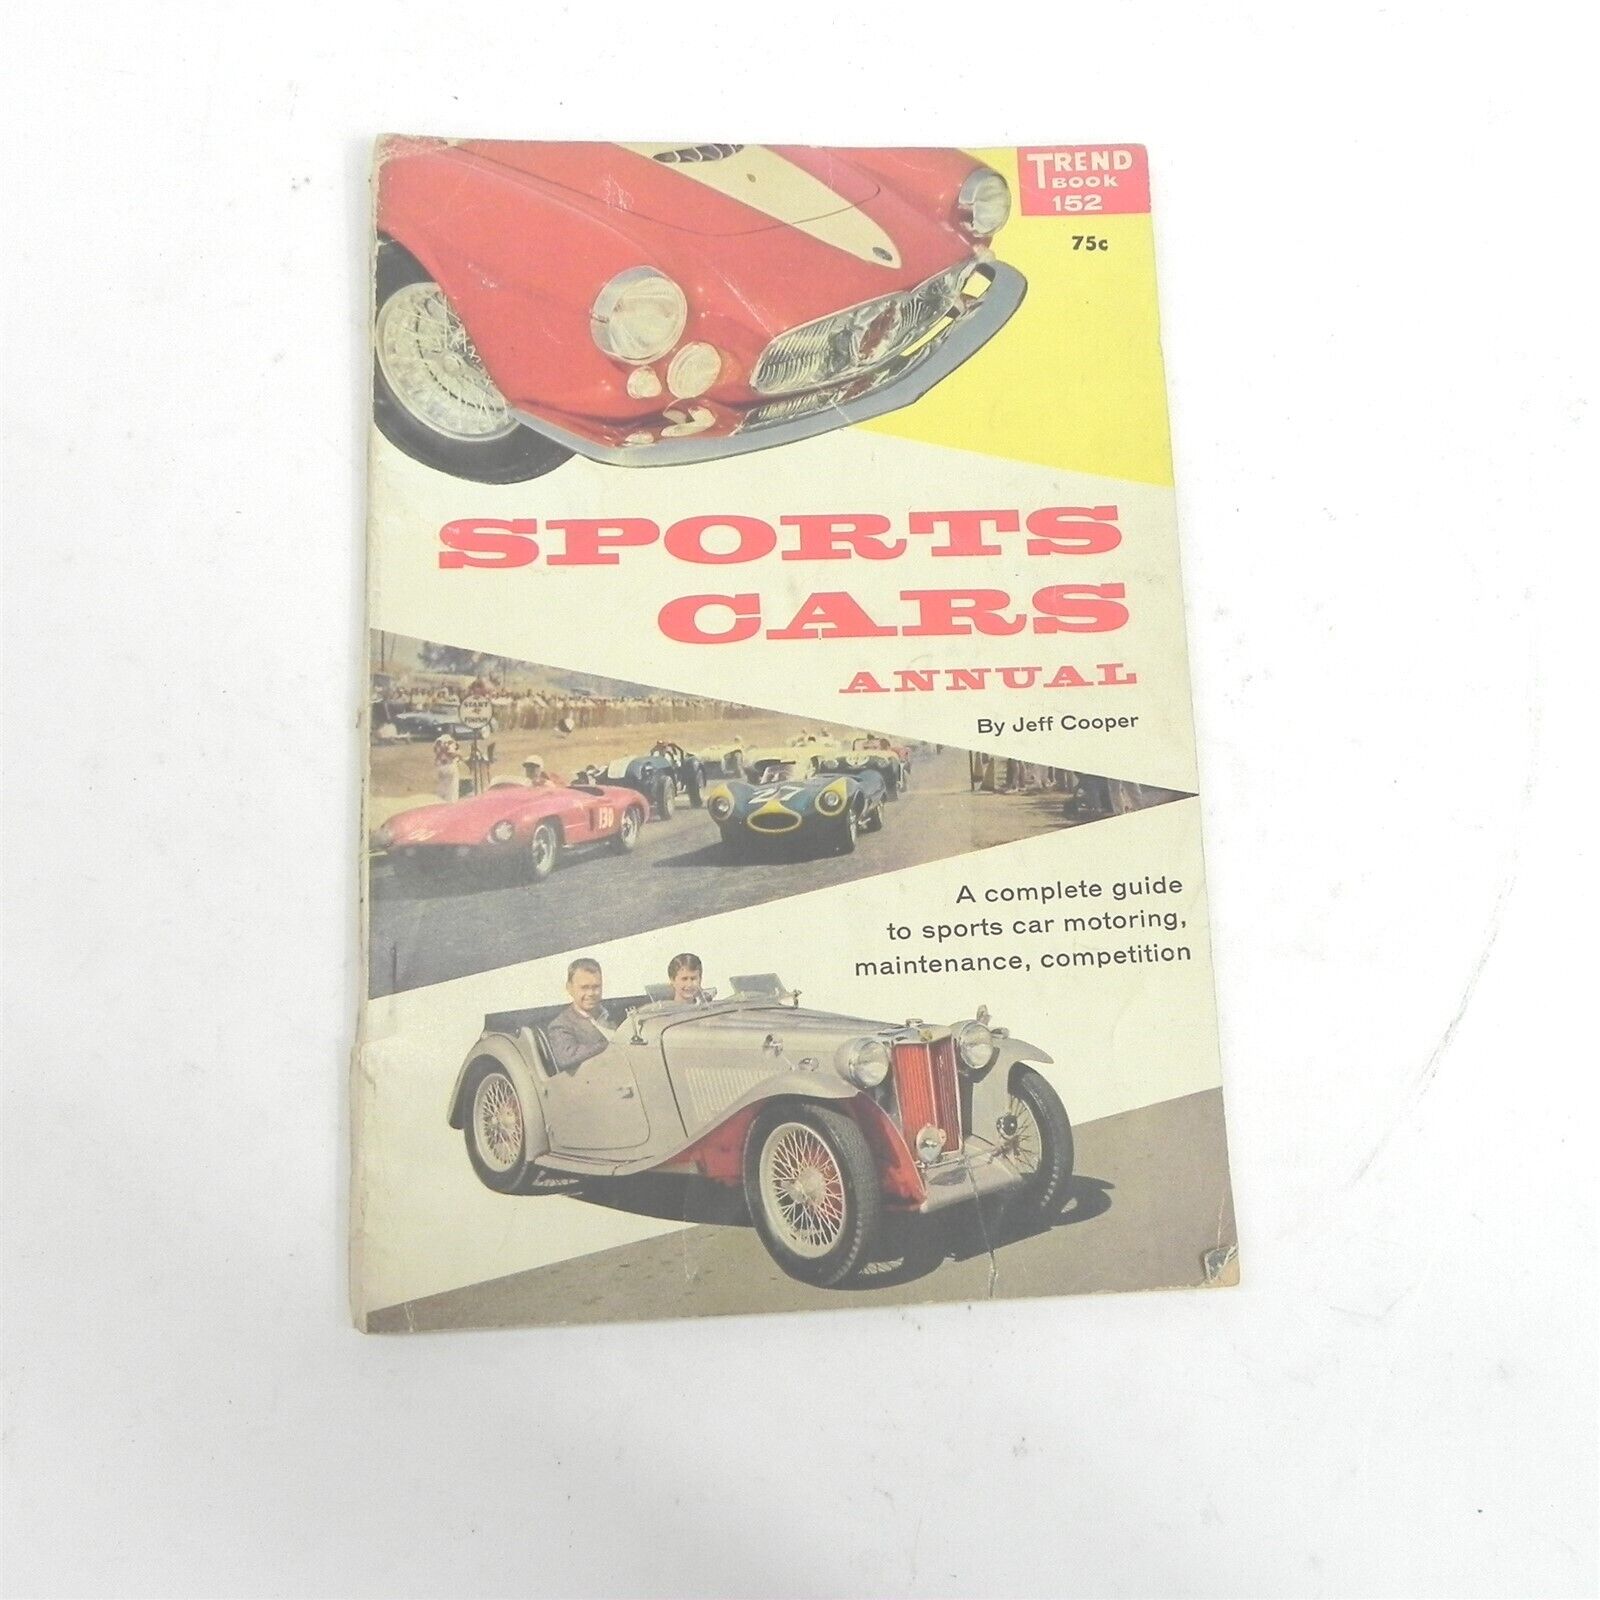 VINTAGE 1957 SPORTS CAR ANNUAL BY JEFF COOPER A COMPLETE GUIDE TO SPORTS CARS